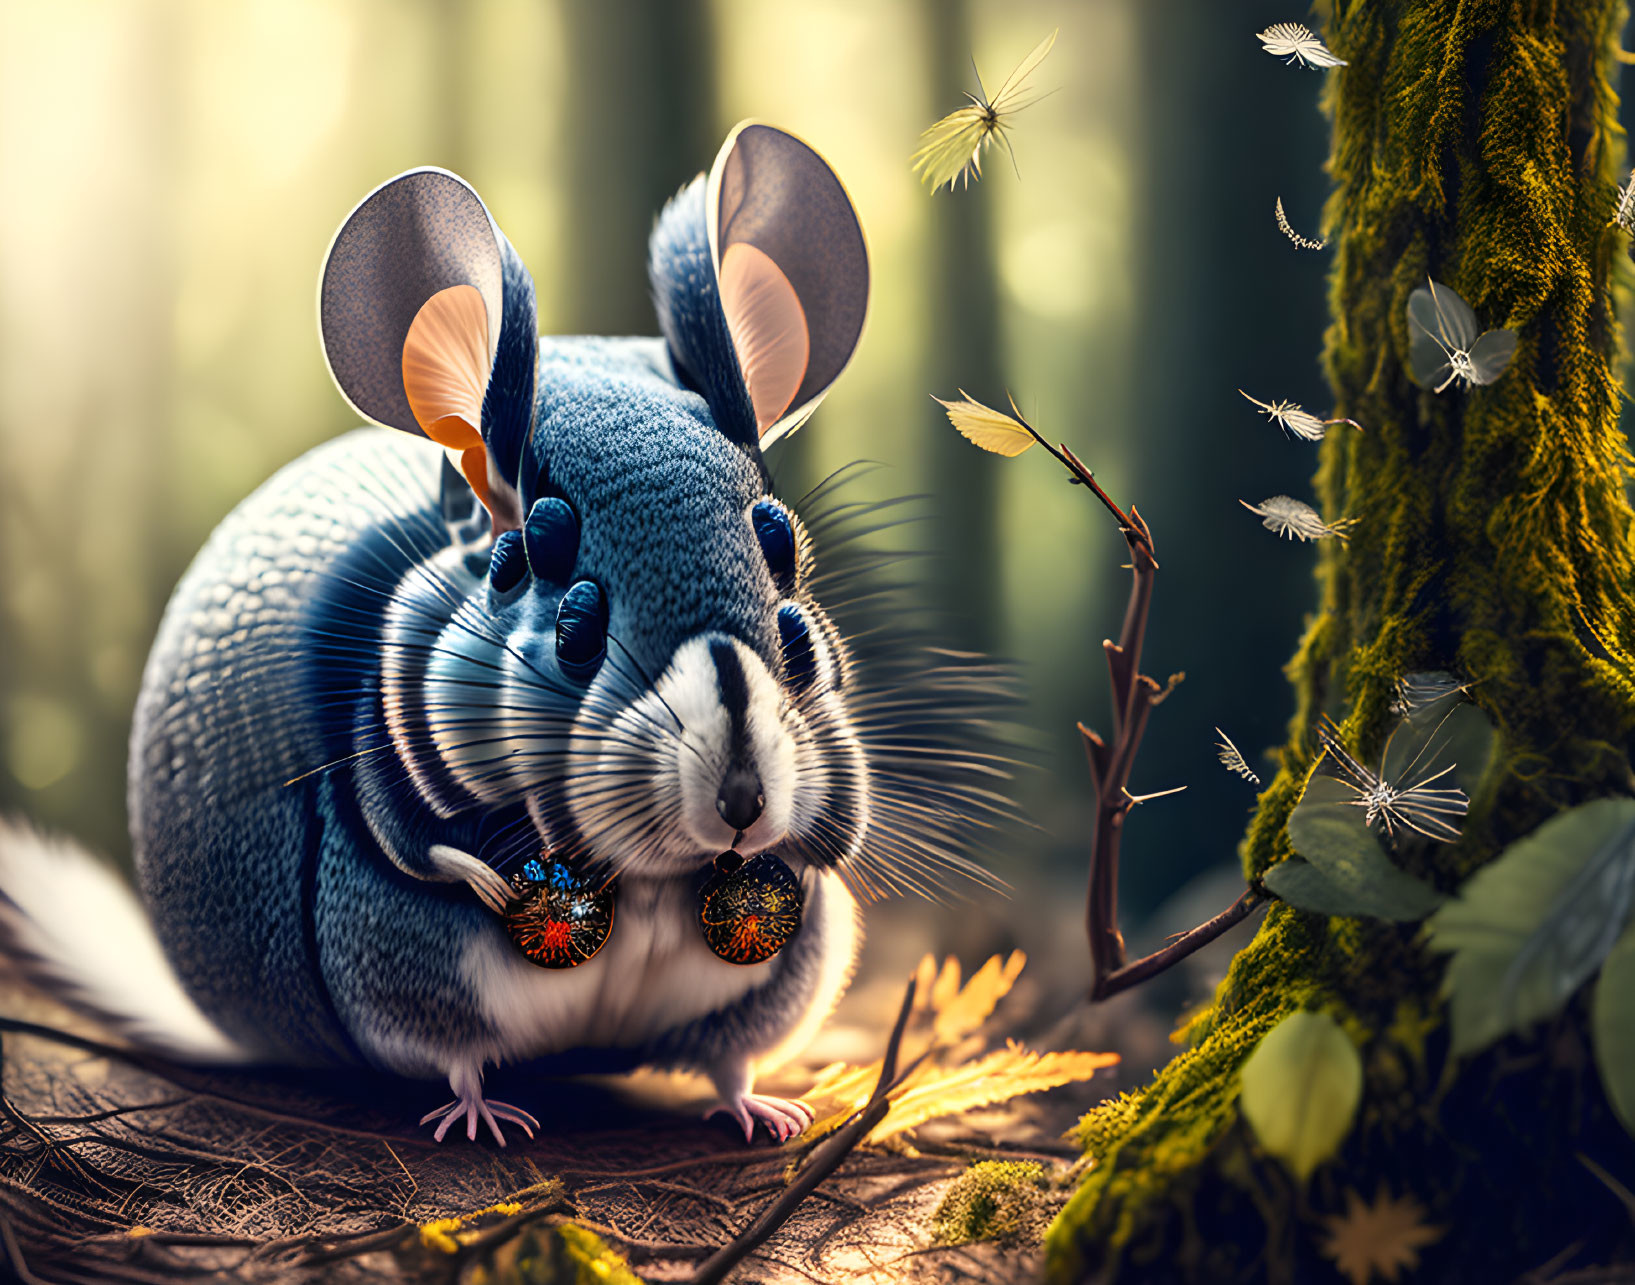 Digital art creature with chinchilla body and mechanical elements in forest scene